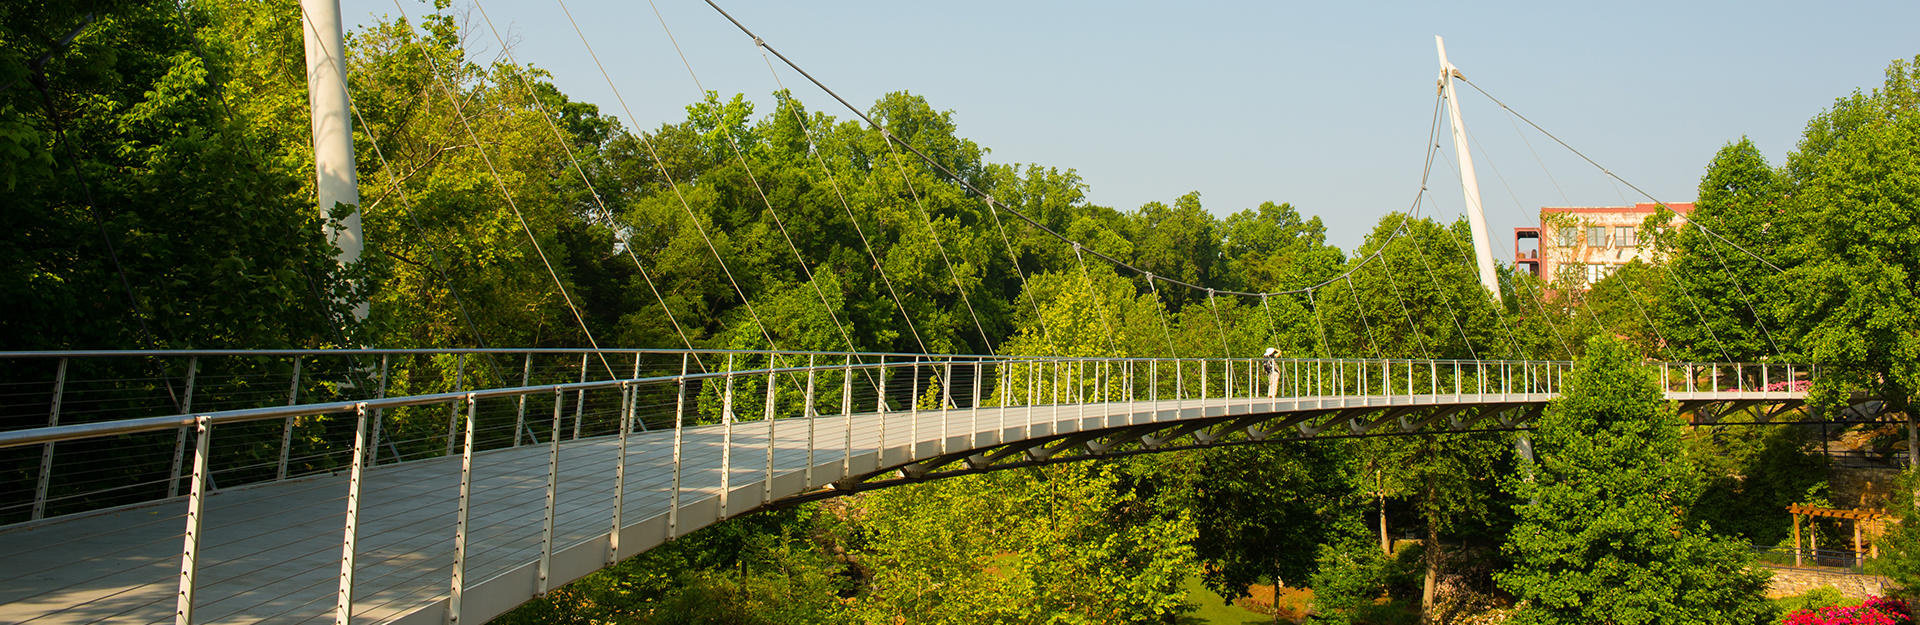 MRED About Banner. Liberty Bridge in Greenville, SC.